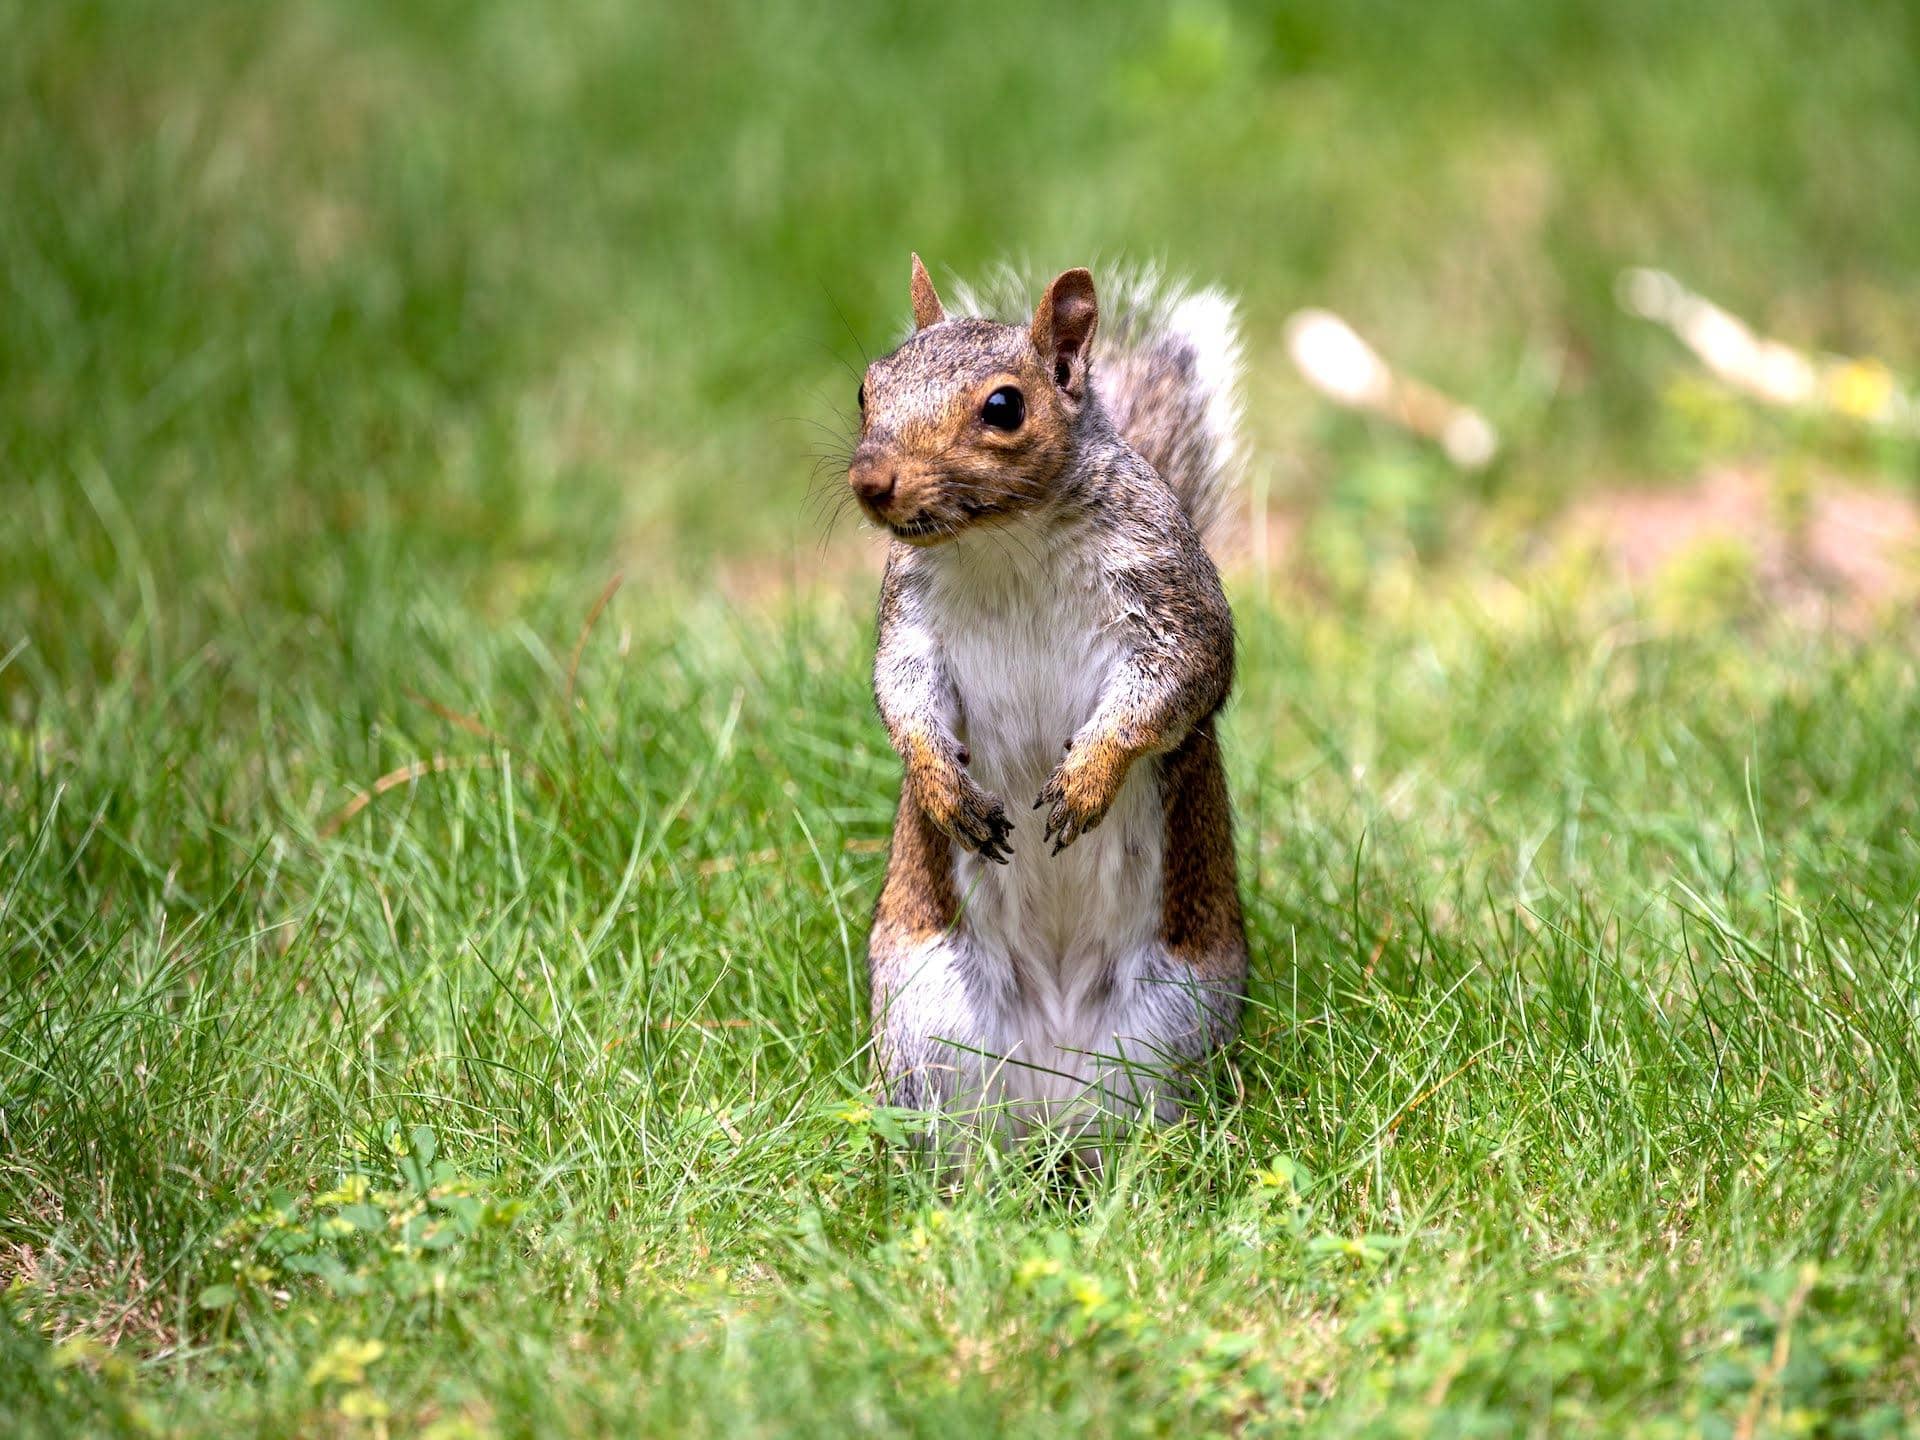 Thoughts I had while watching squirrels flagrantly trespass on my land and steal my acorns.